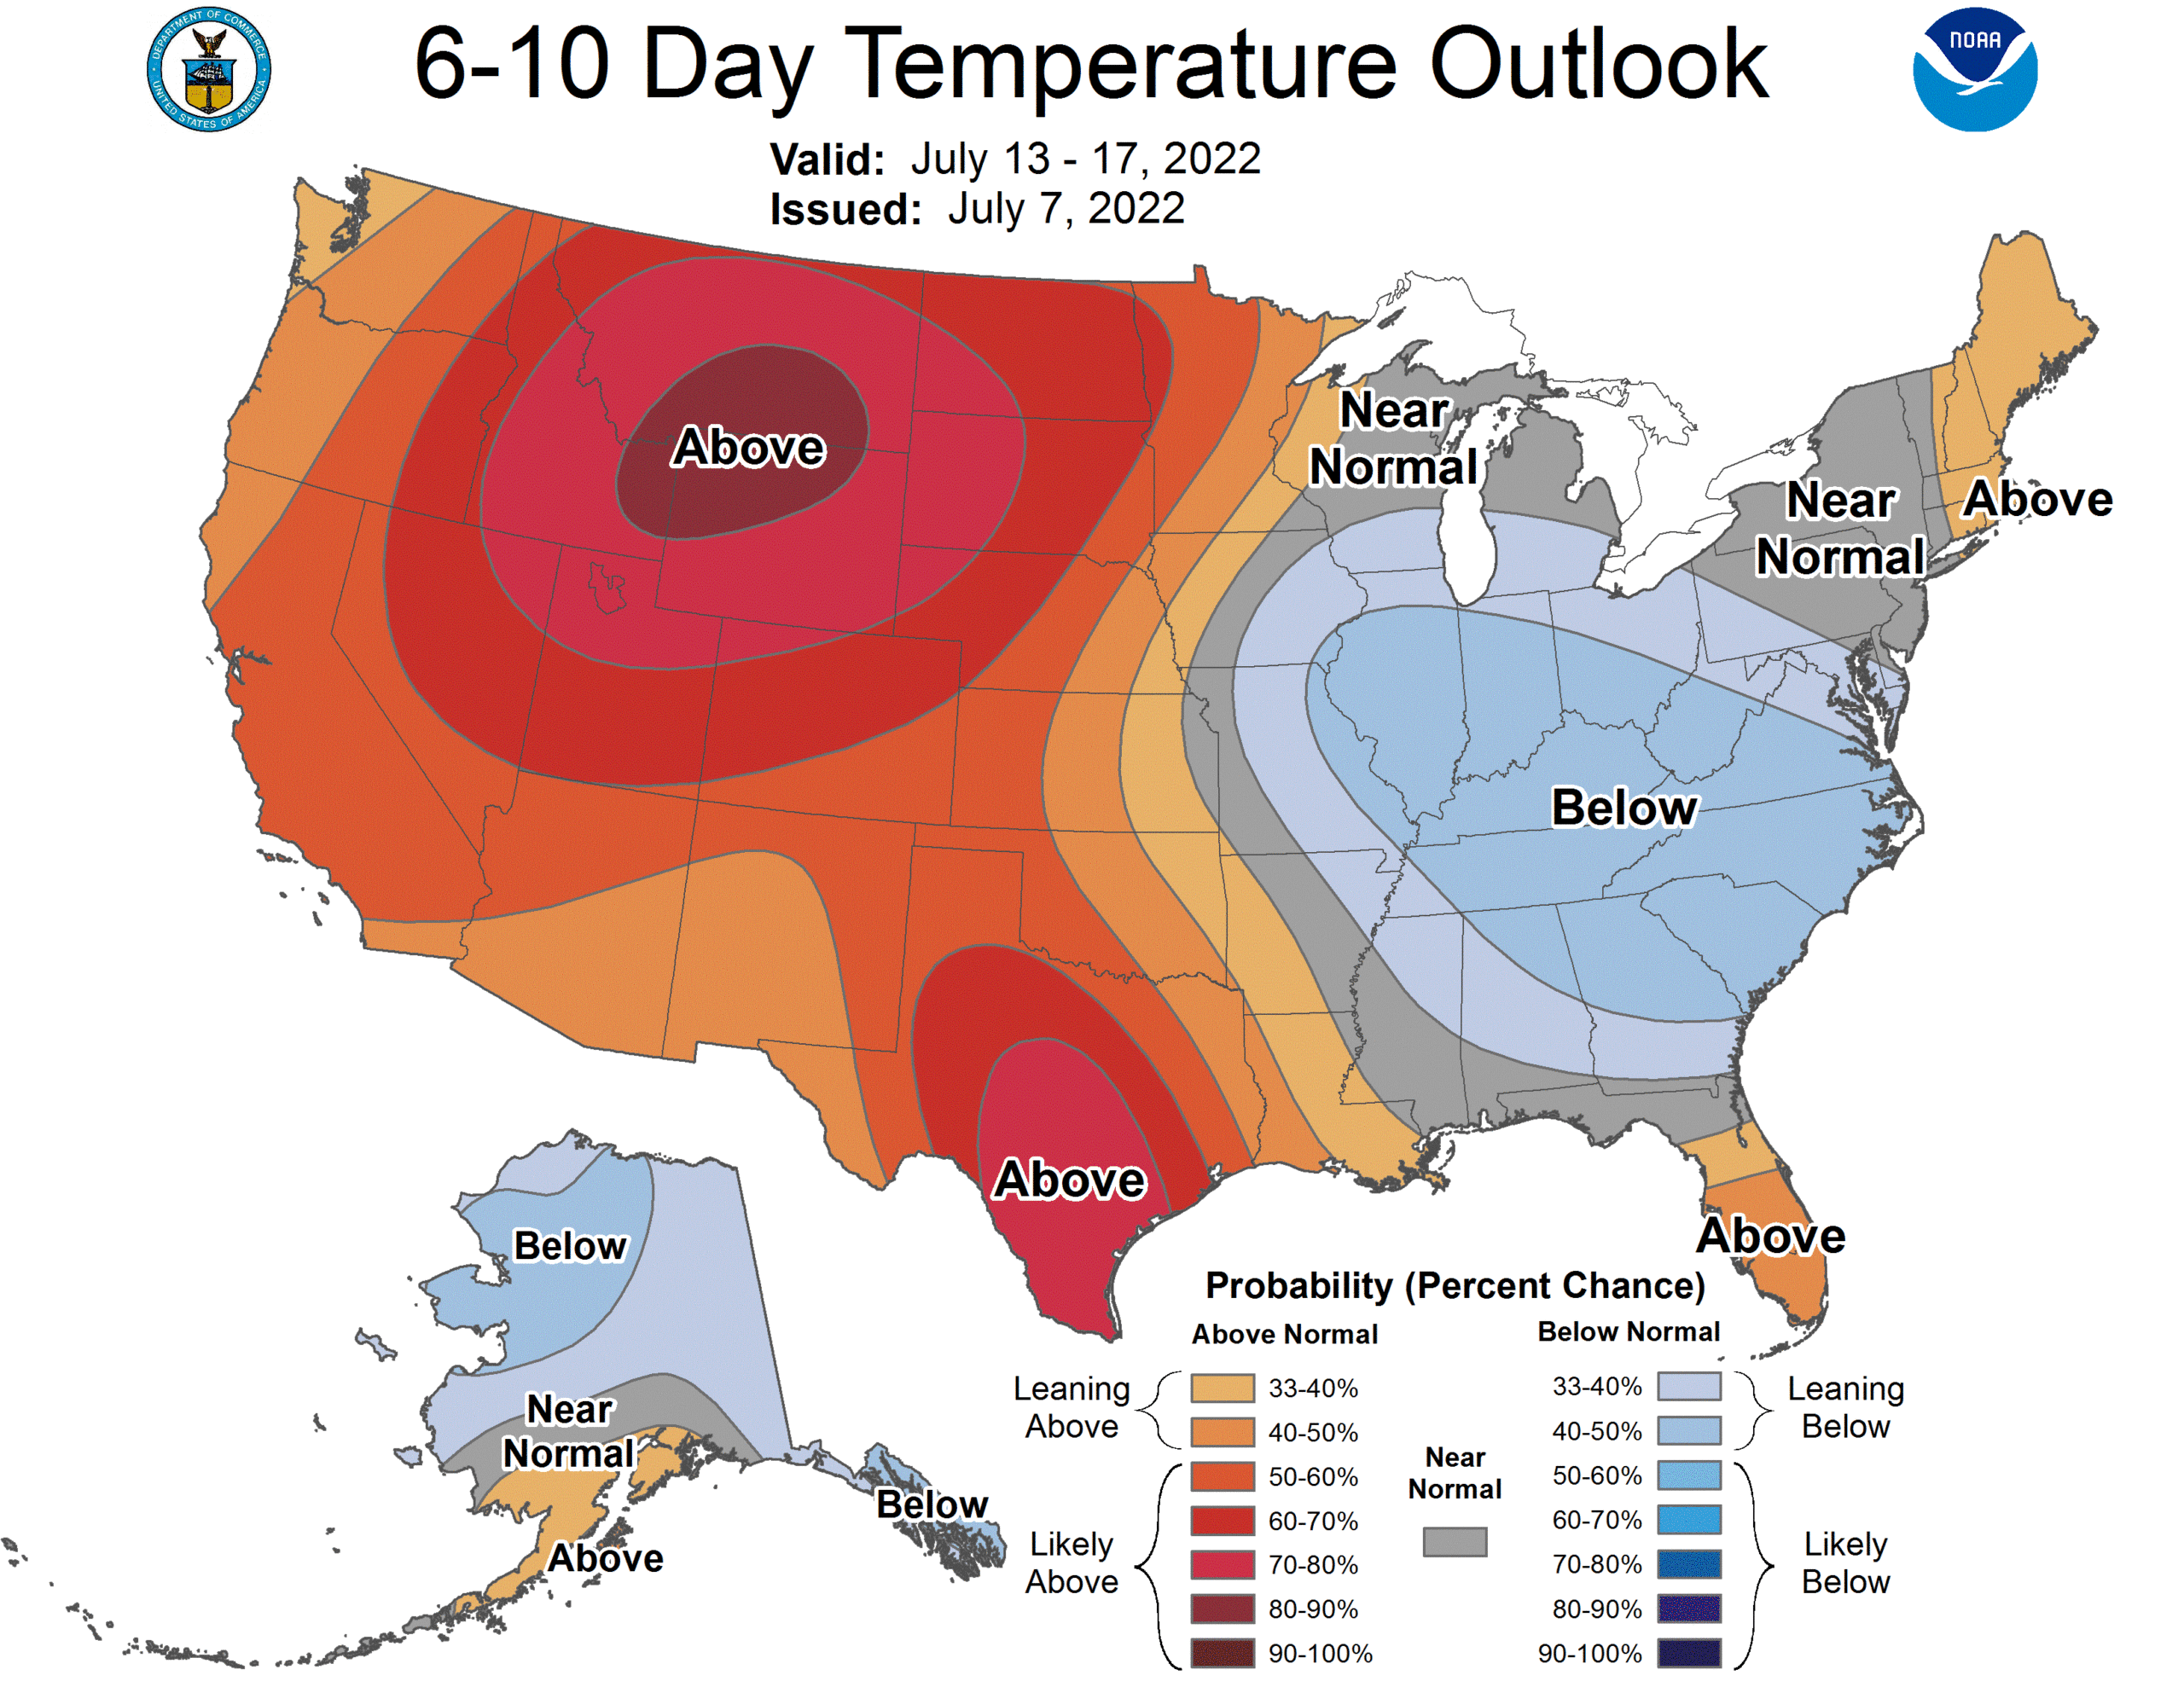 6 to 10 Day Outlook - Temperature Probability